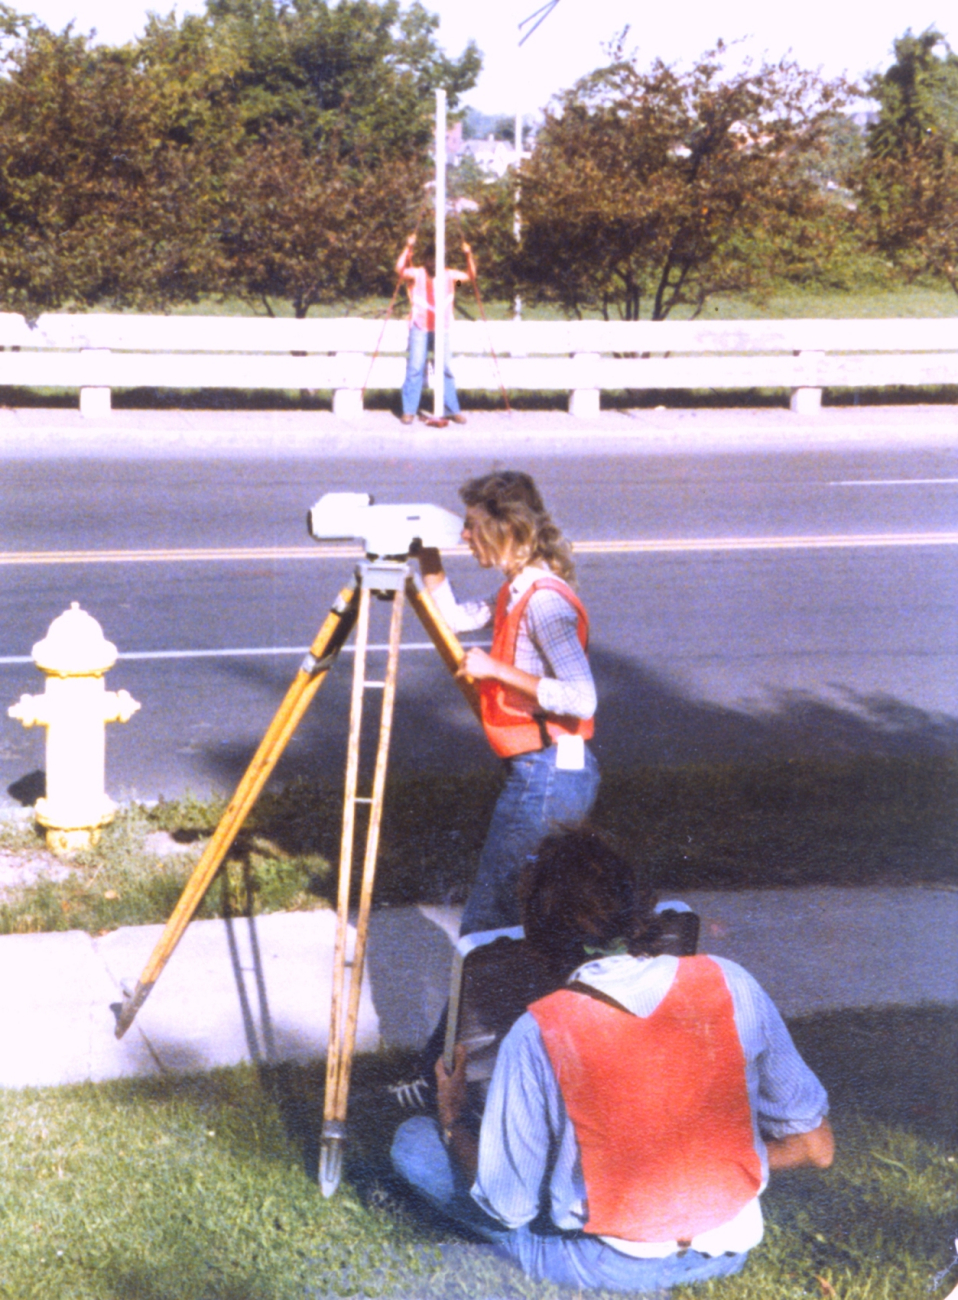 Anita Whitis observing on a level rod to left, while second rodman waits forreading across street